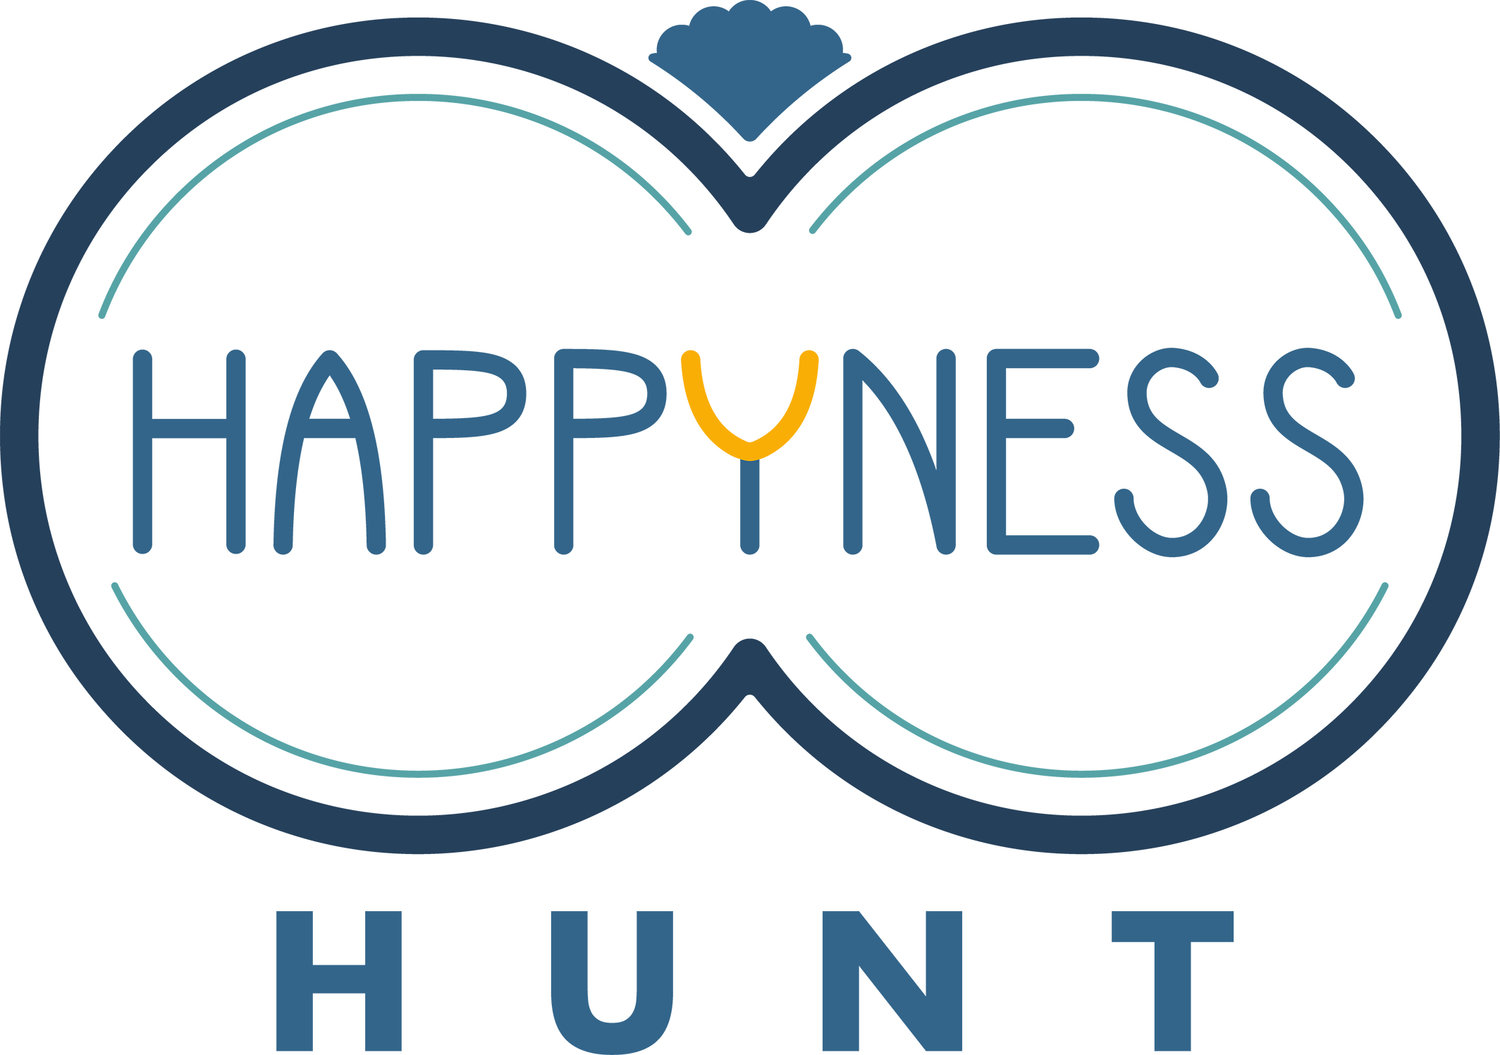 The Happyness Hunt